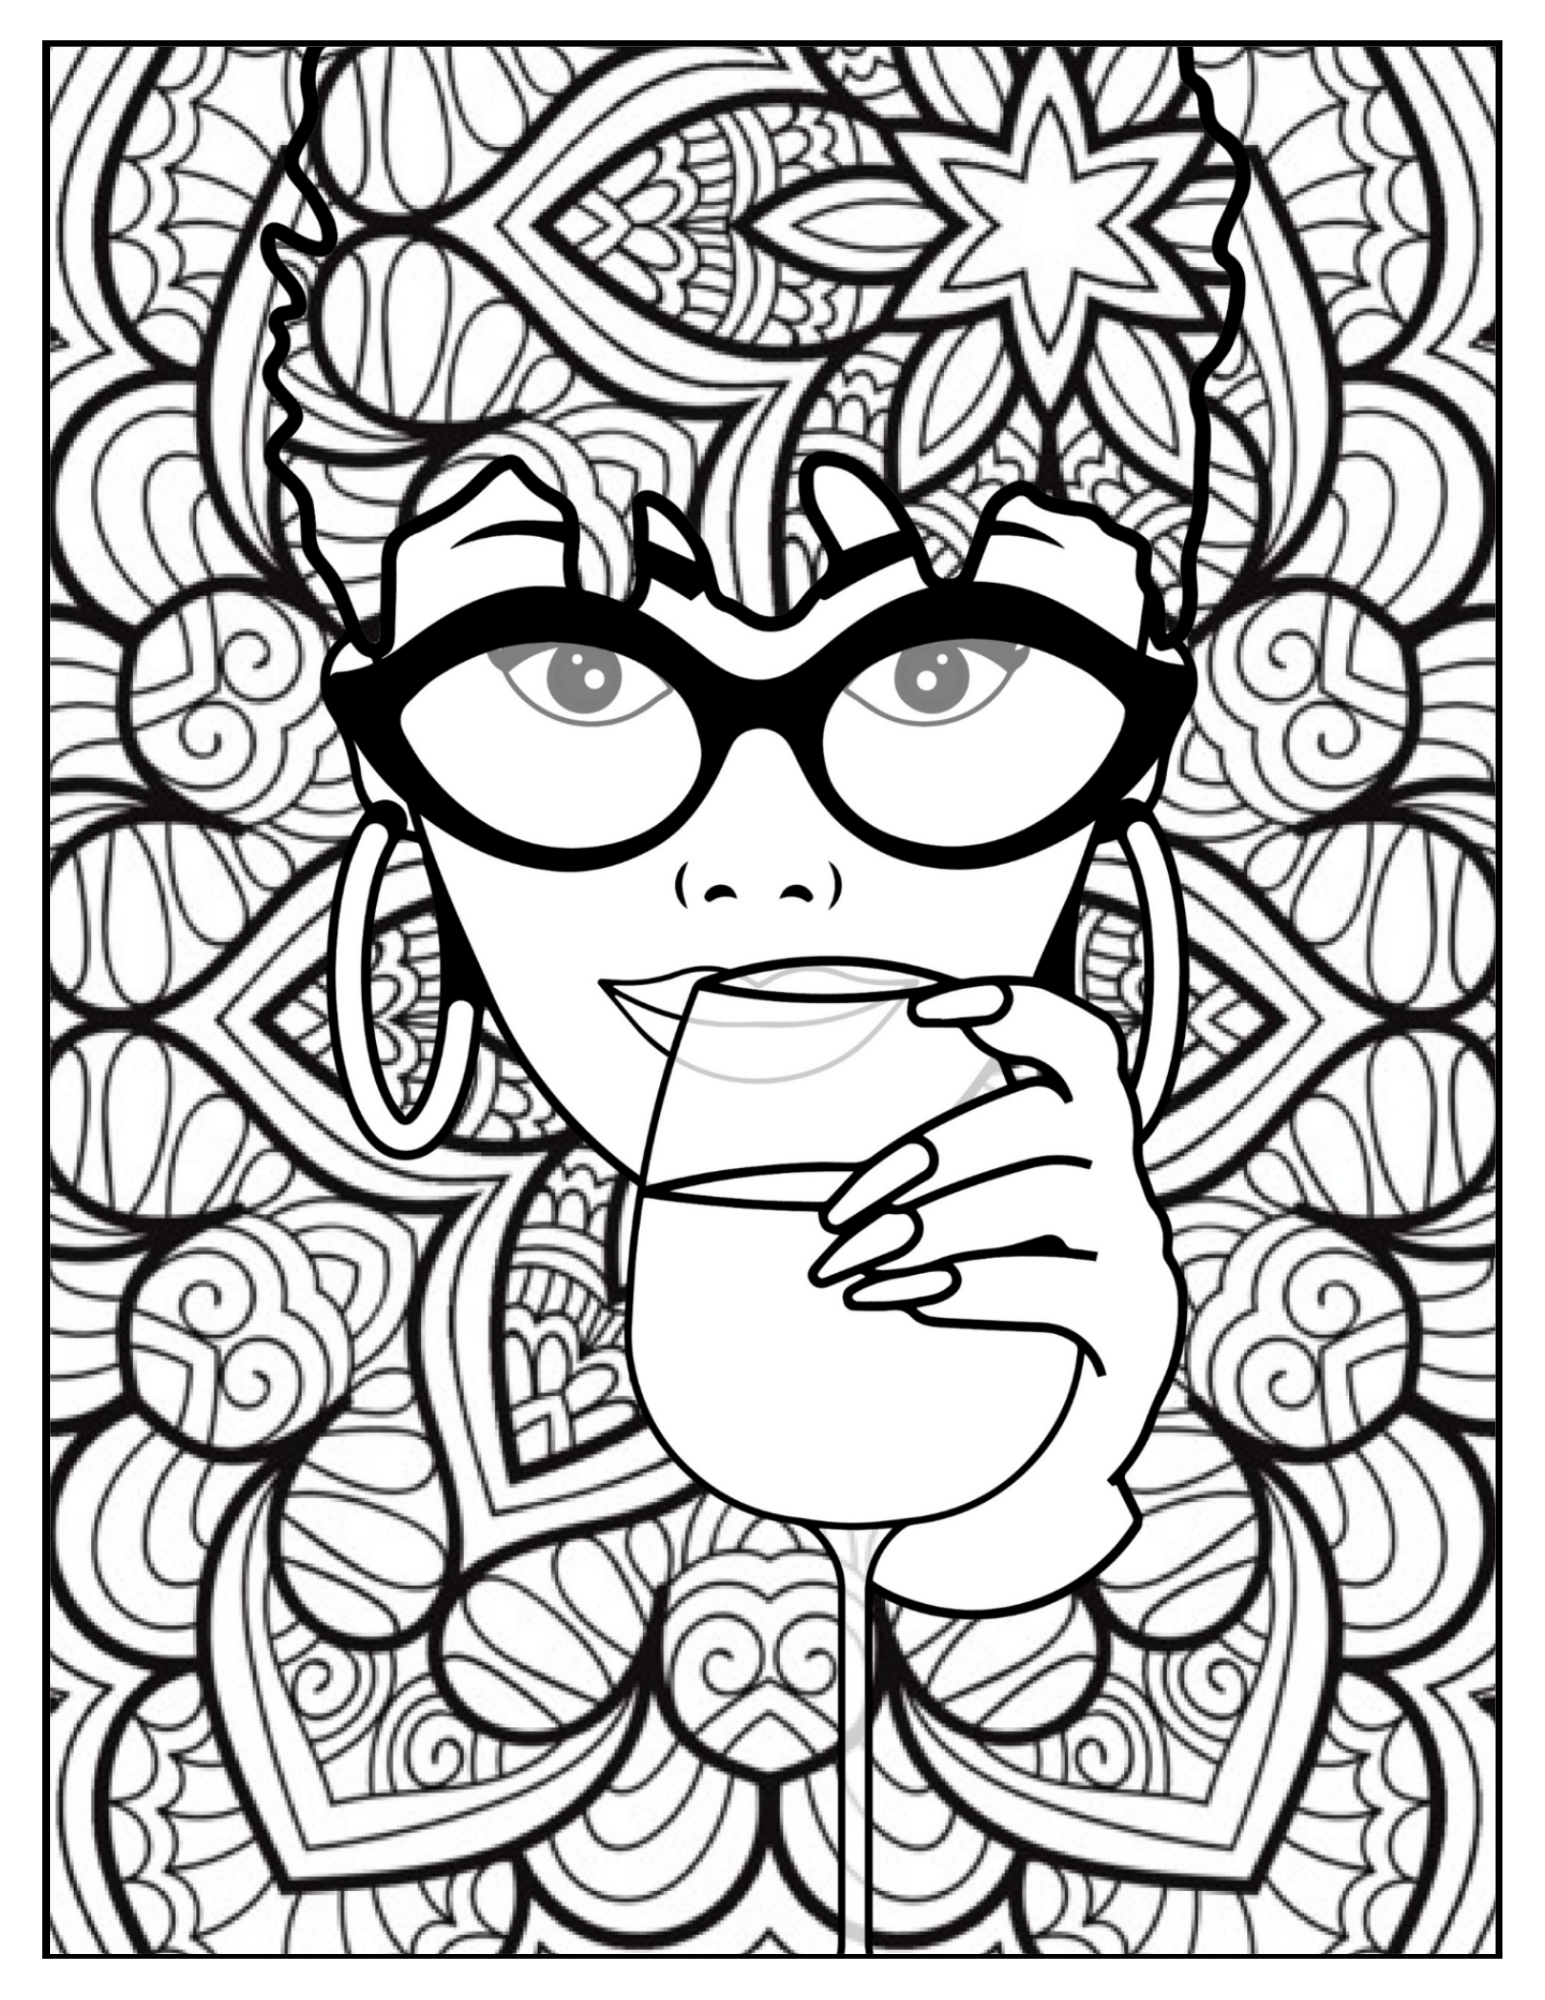 Printable coloring page avah w wine glass